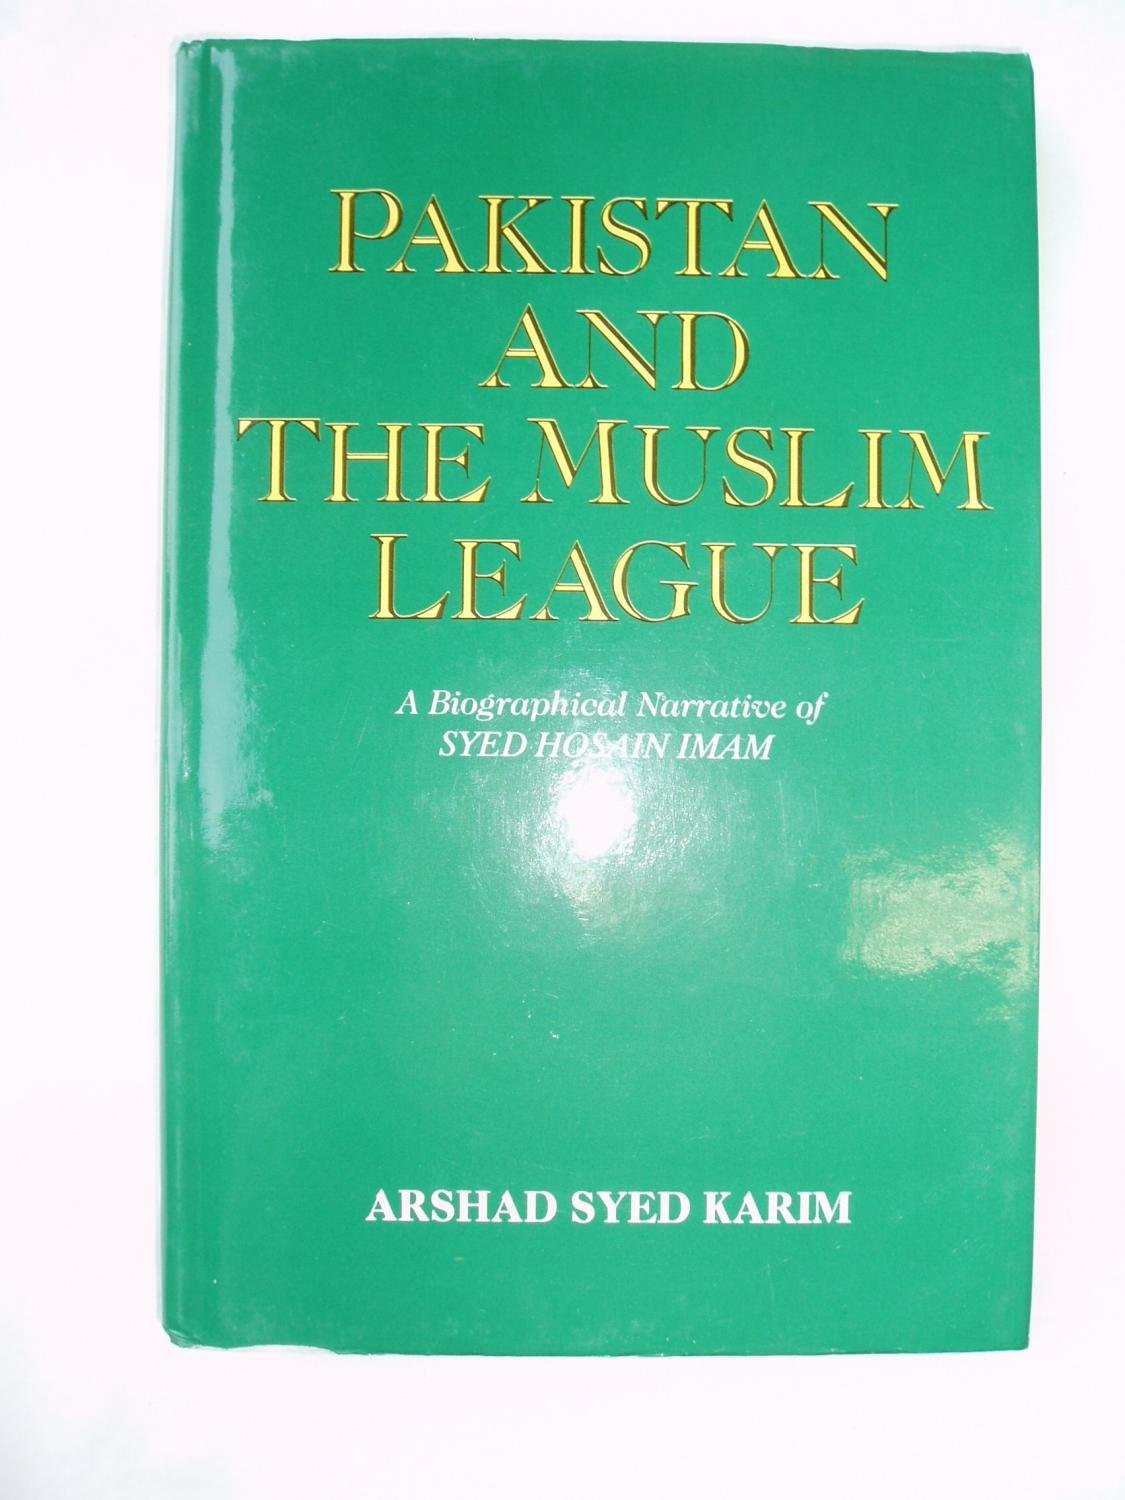 pakistan and the muslim league: a biographical narrative of syed hosain imam